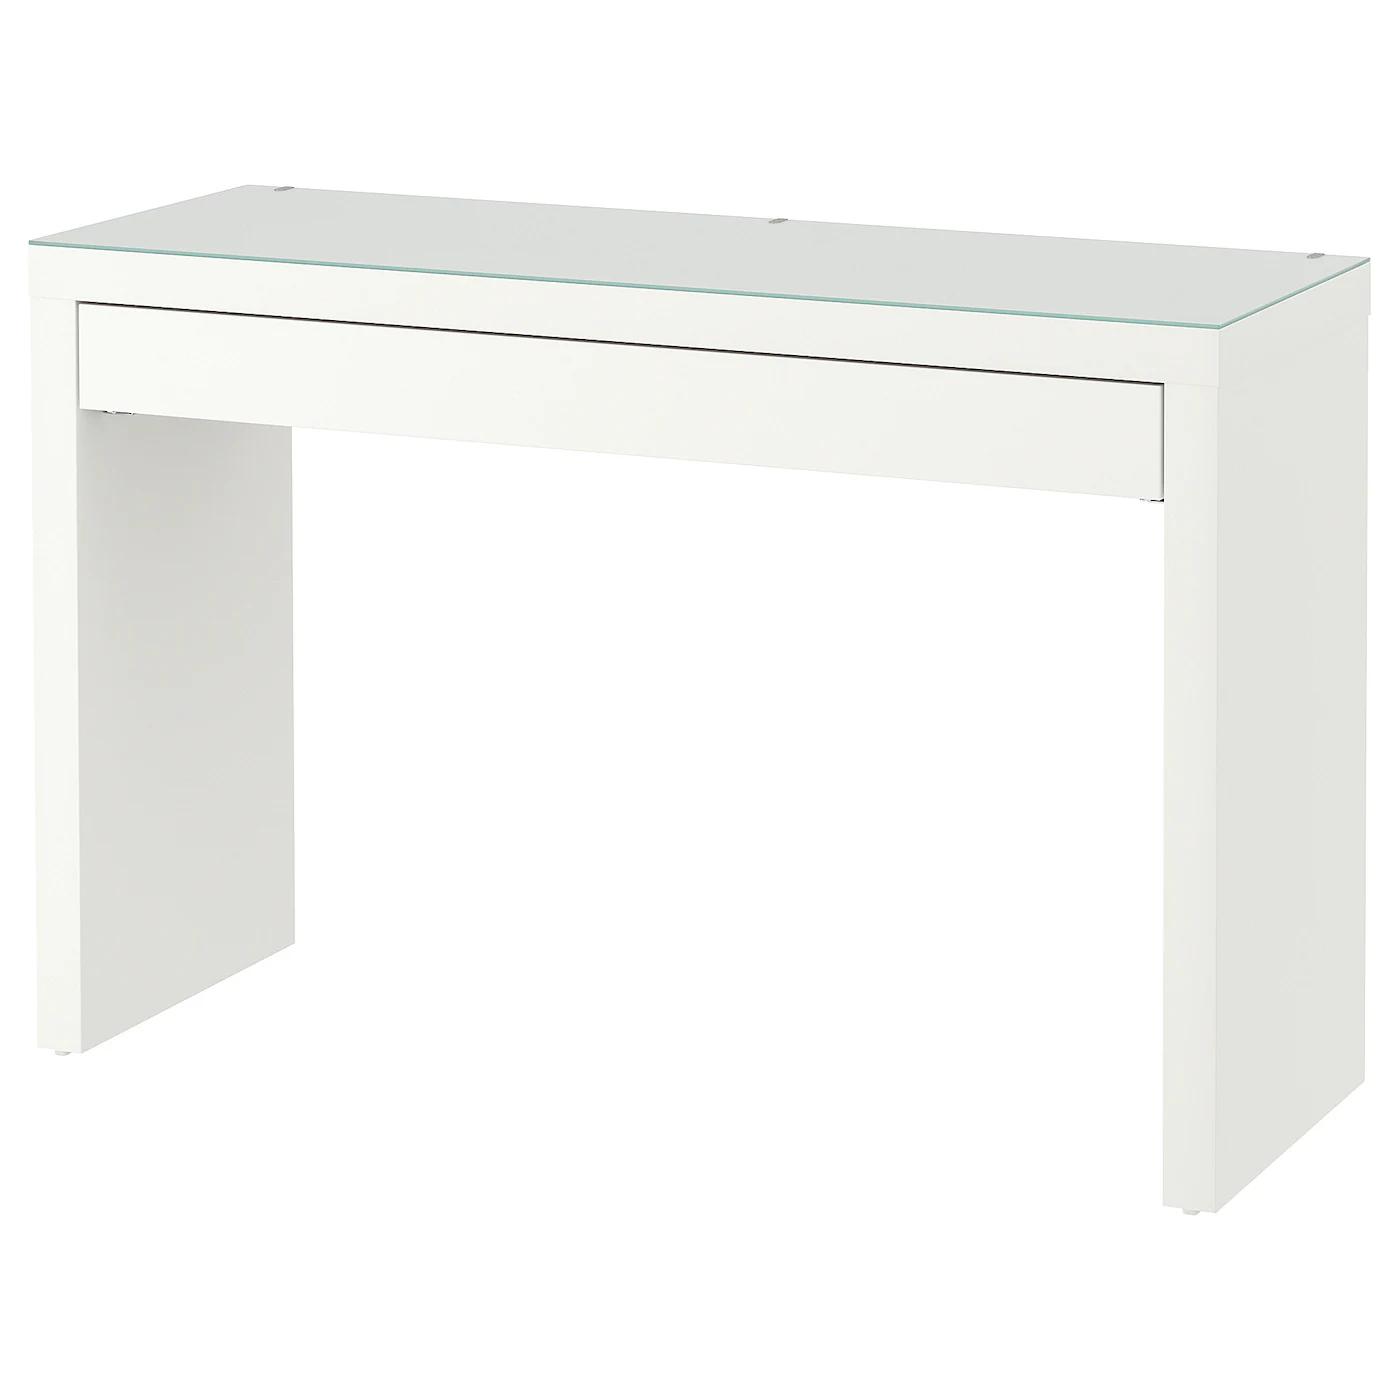 ikea smoked glass top - Does the Malm desk have a glass top